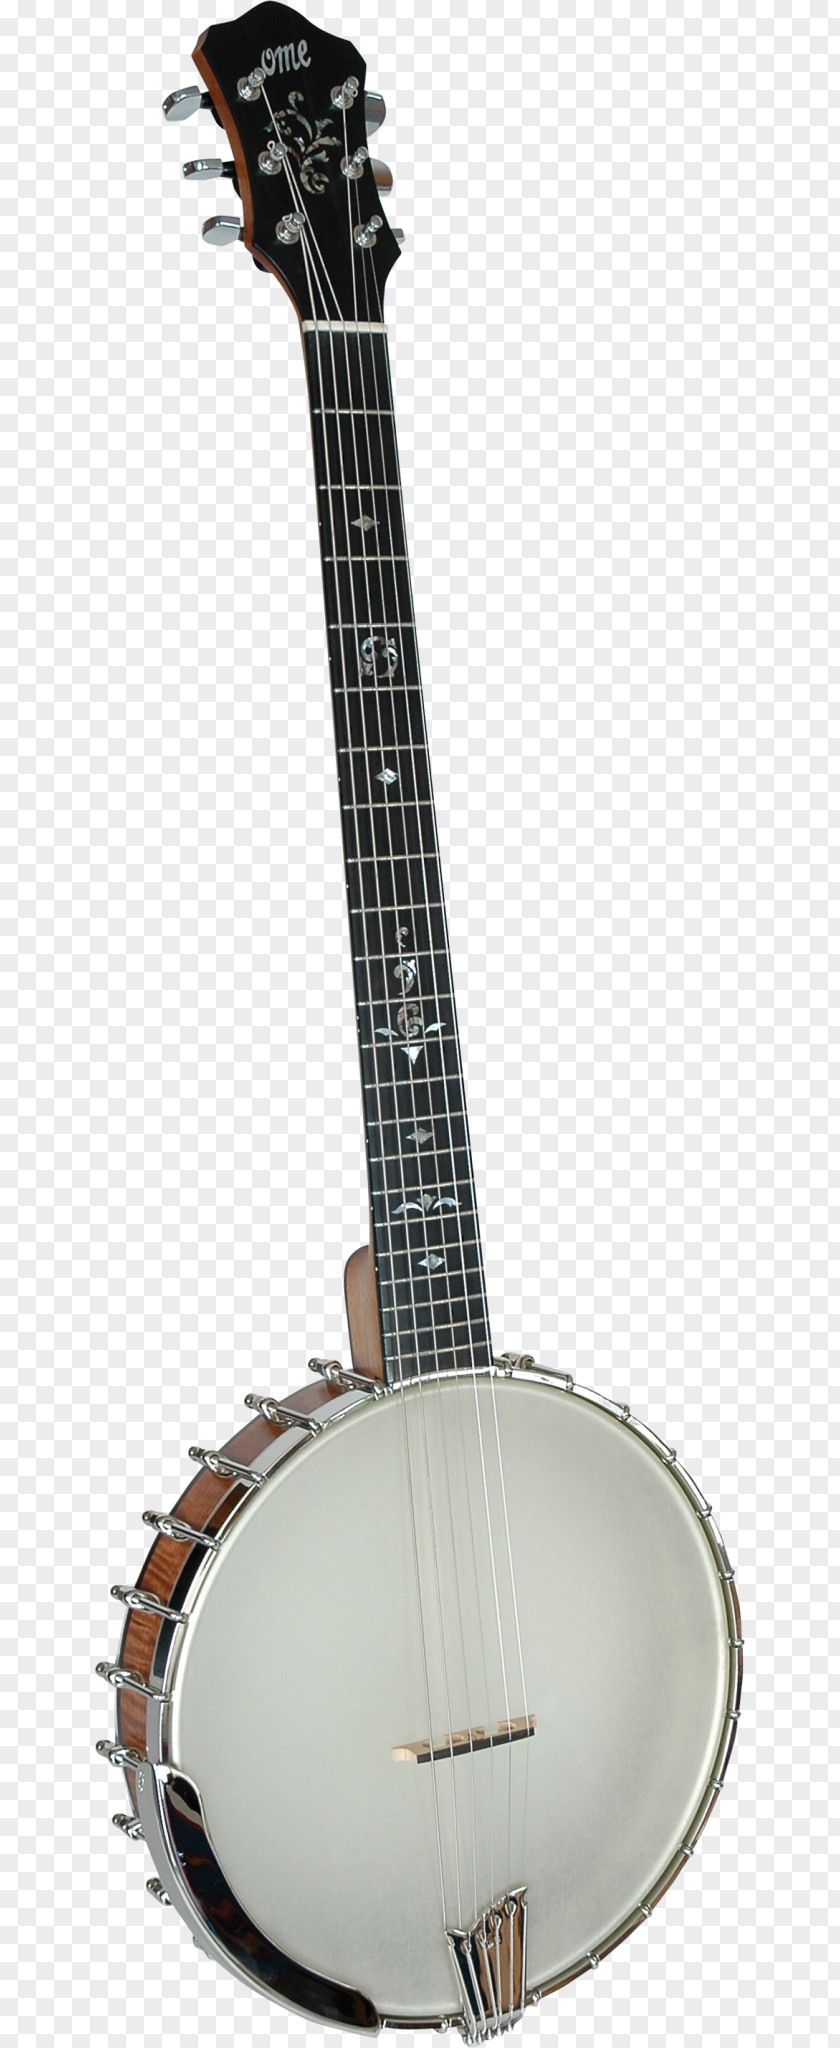 Bass Guitar Musical Instruments Banjo Acoustic-electric Acoustic PNG